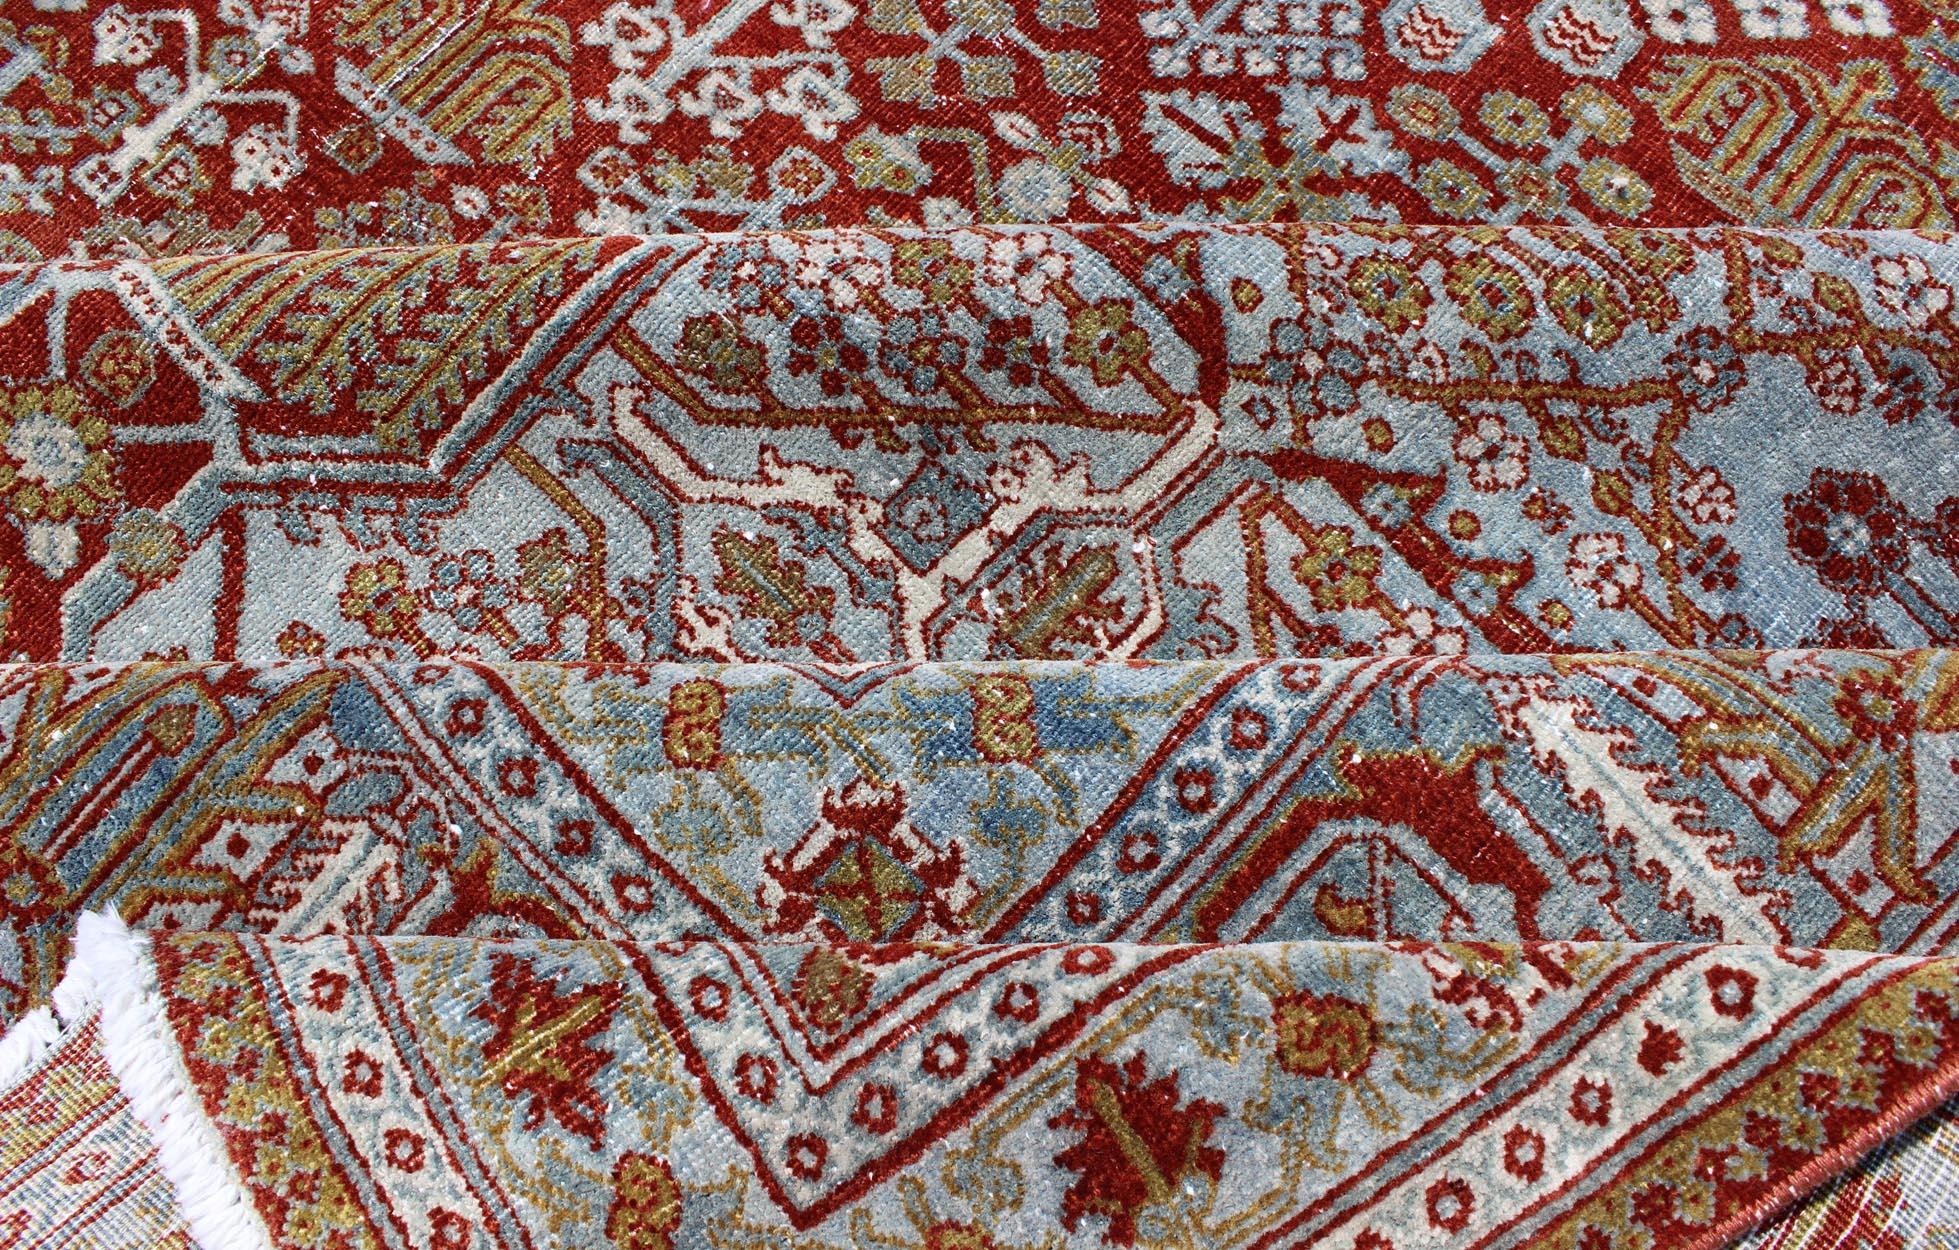 Large Antique Persian Joshegan rug with geometric medallion in rust red, light blue, green, gold and olive, rug 18-0101, country of origin / type: Iran / Joshegan, circa 1920.

Measures: 12' x 20'.

This finely woven antique Persian Joshegan rug